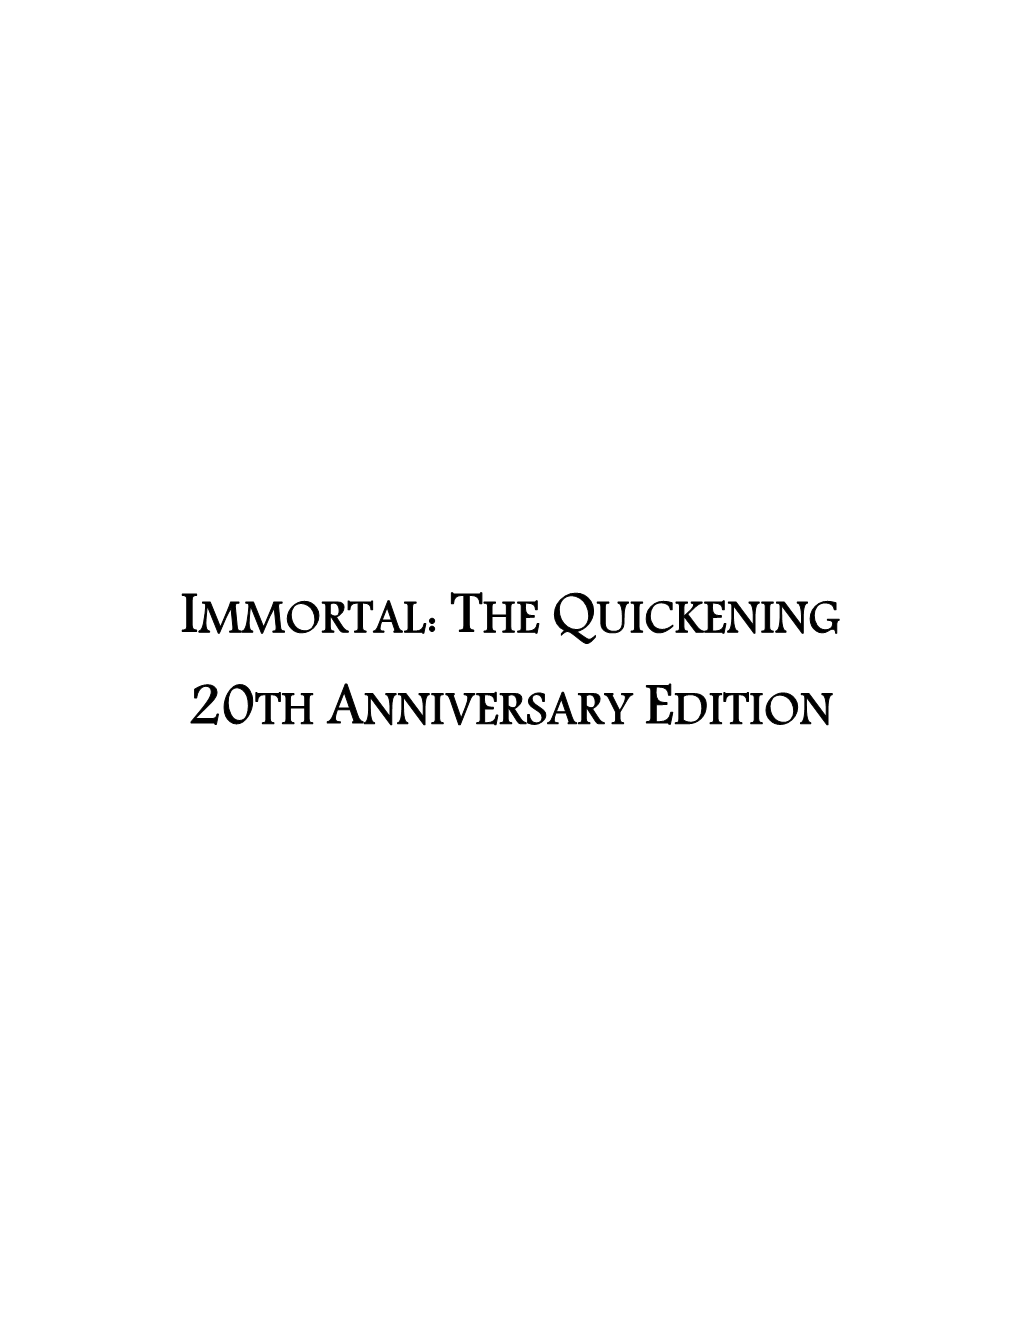 IMMORTAL: the QUICKENING 20TH ANNIVERSARY EDITION Foreword